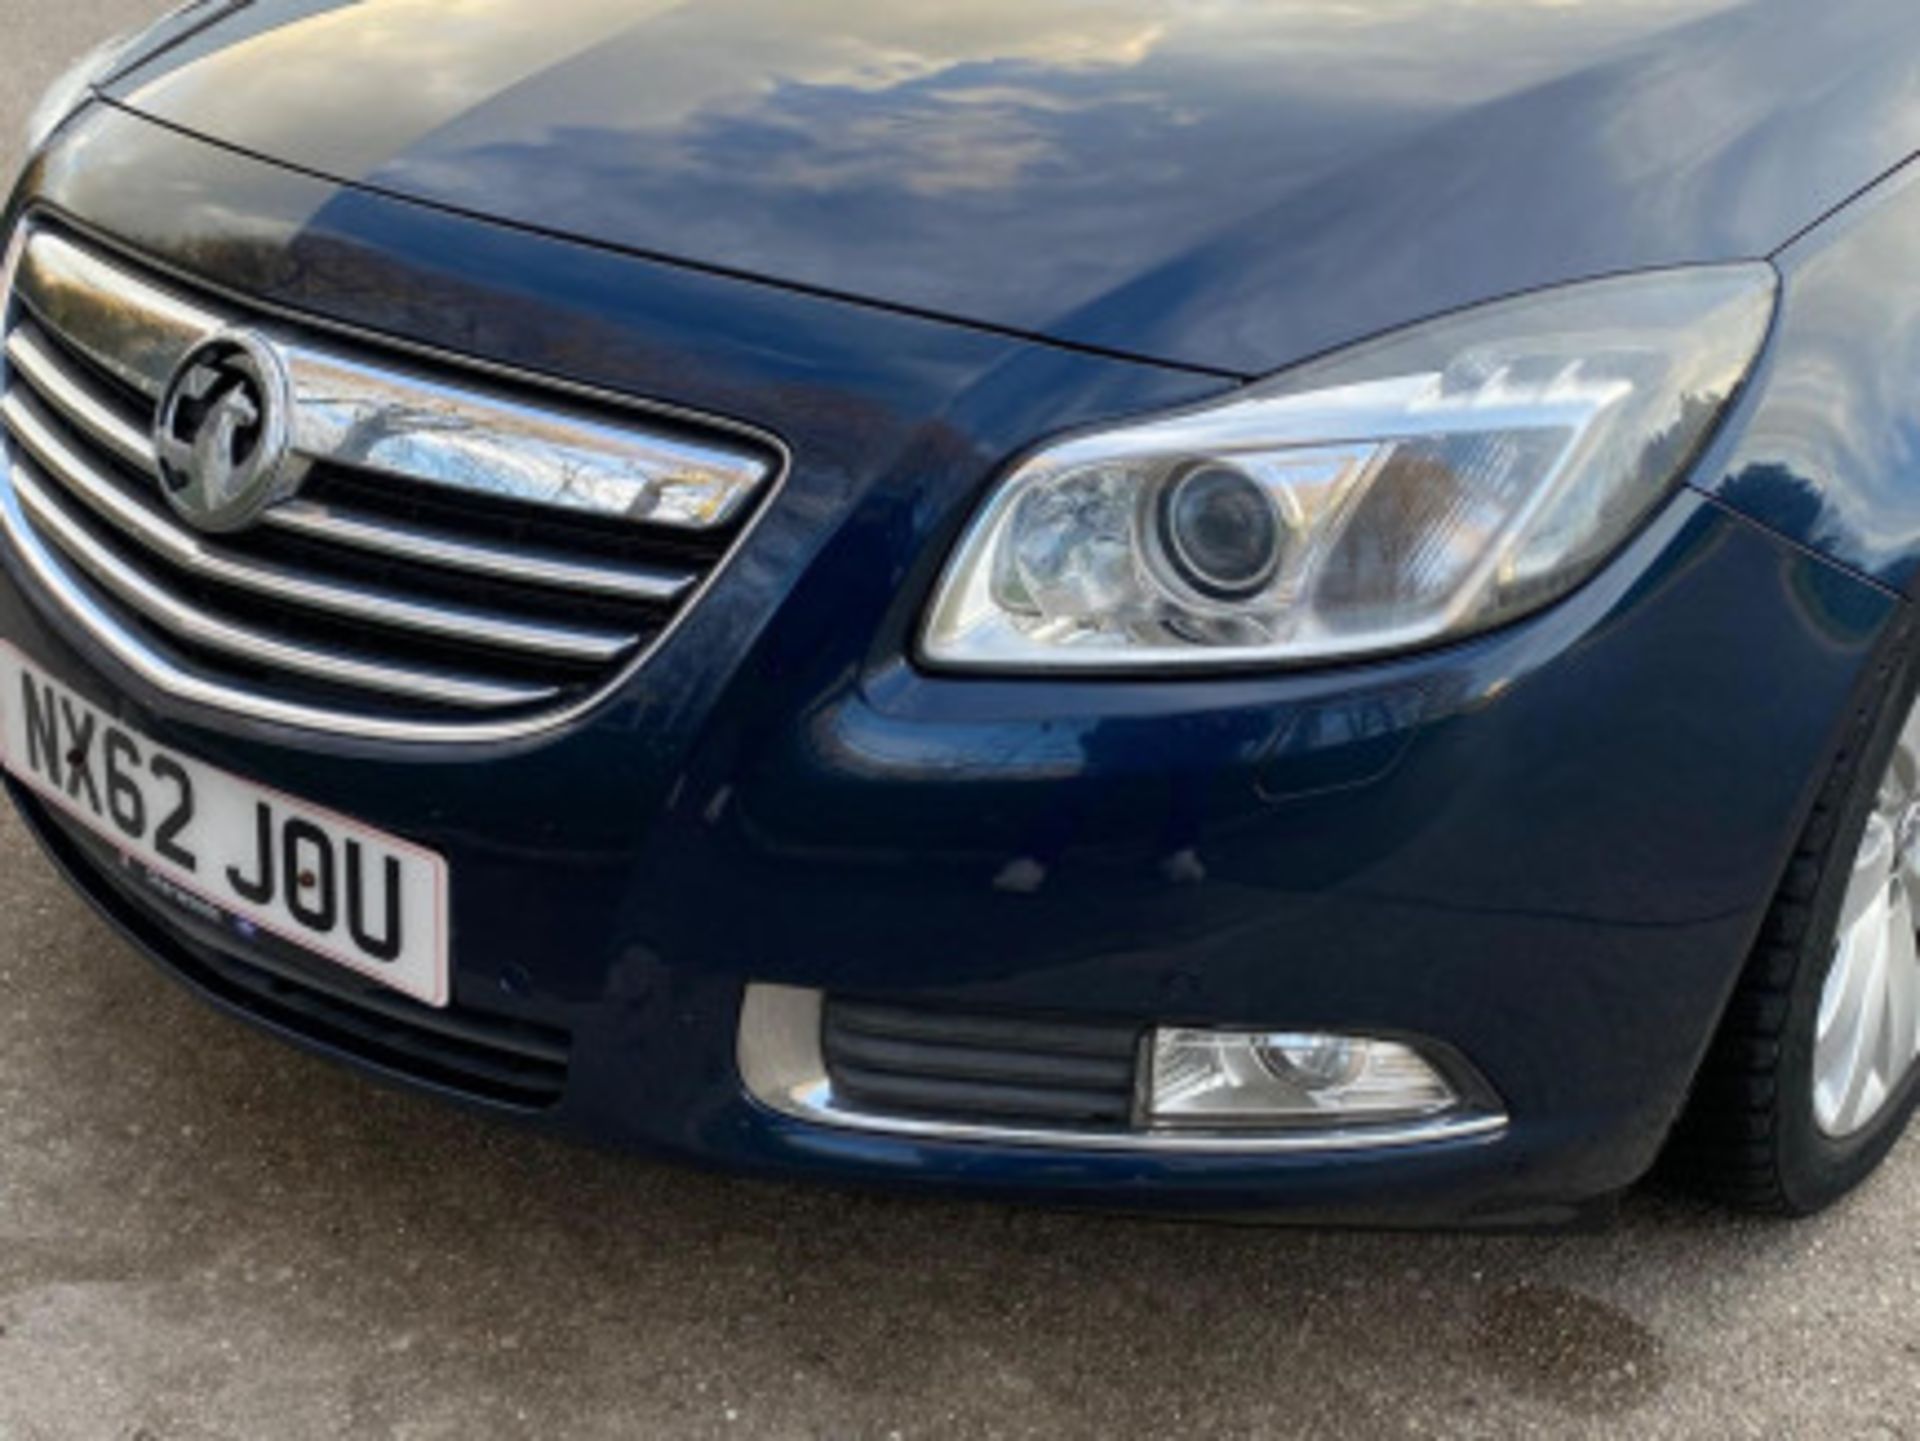 2012 VAUXHALL INSIGNIA 2.0 CDTI ELITE AUTO EURO 5 - DISCOVER EXCELLENCE >>--NO VAT ON HAMMER--<< - Image 26 of 79